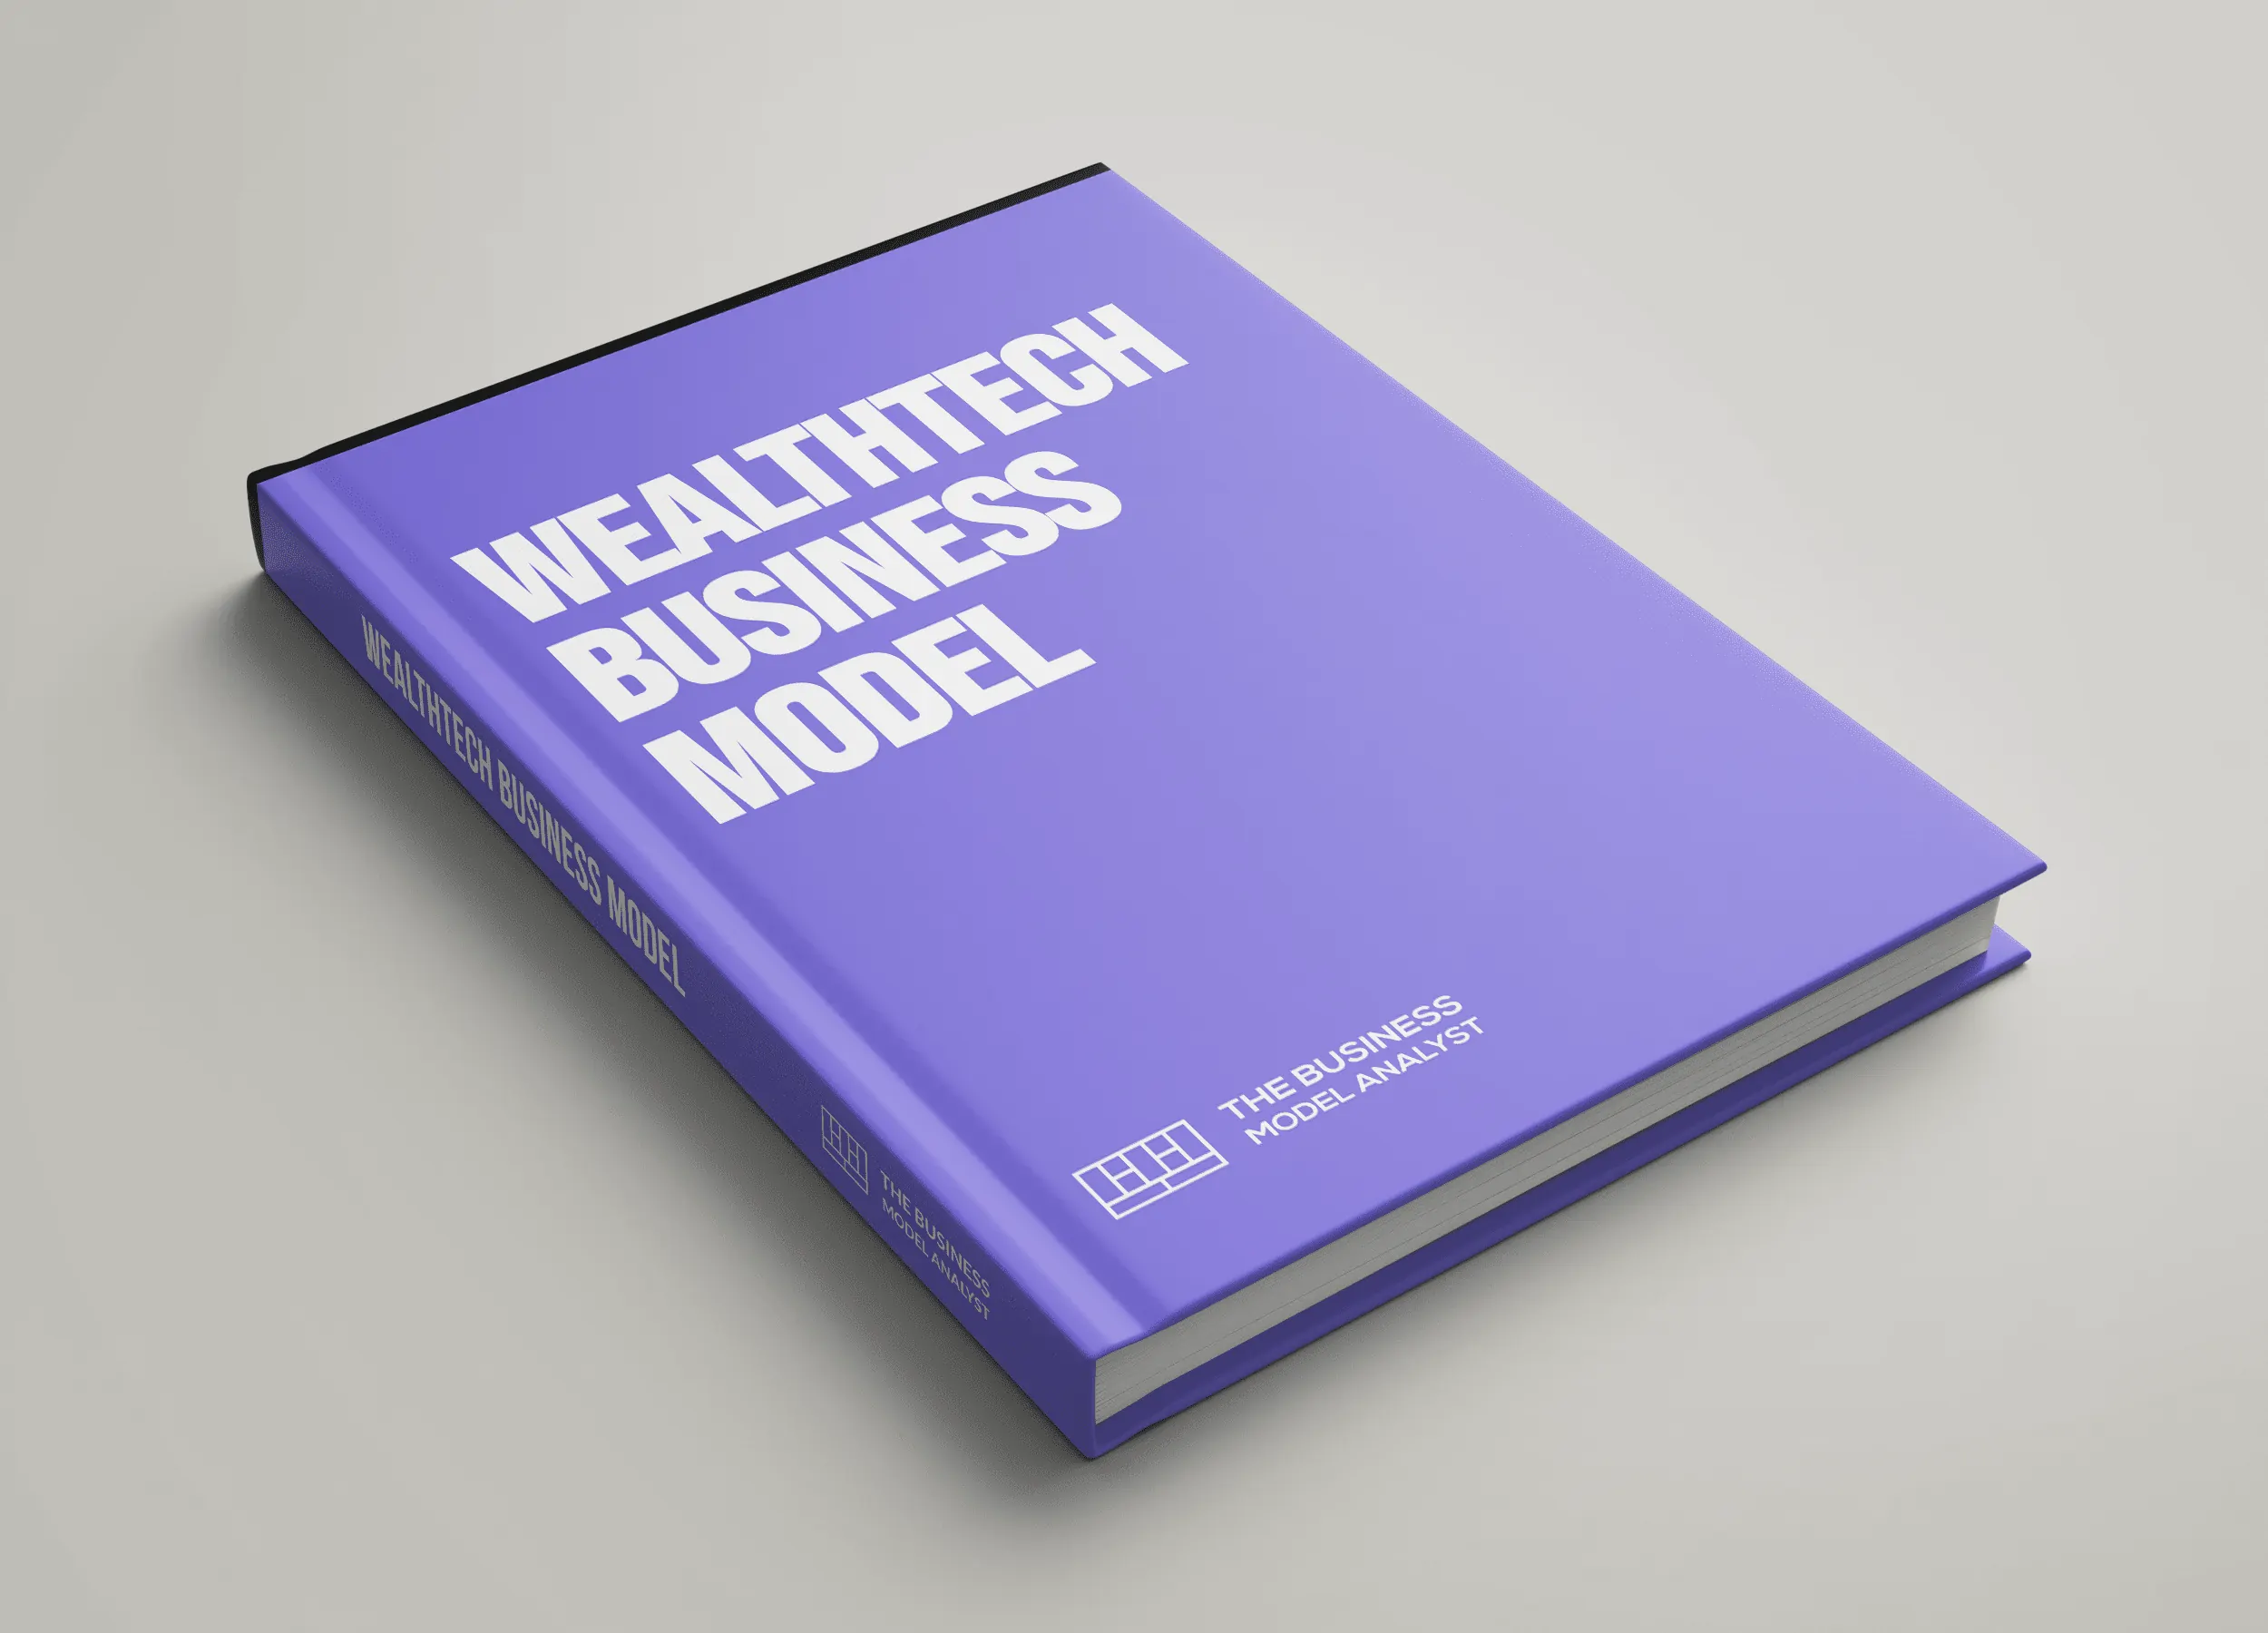 Wealthtech Business Model Cover